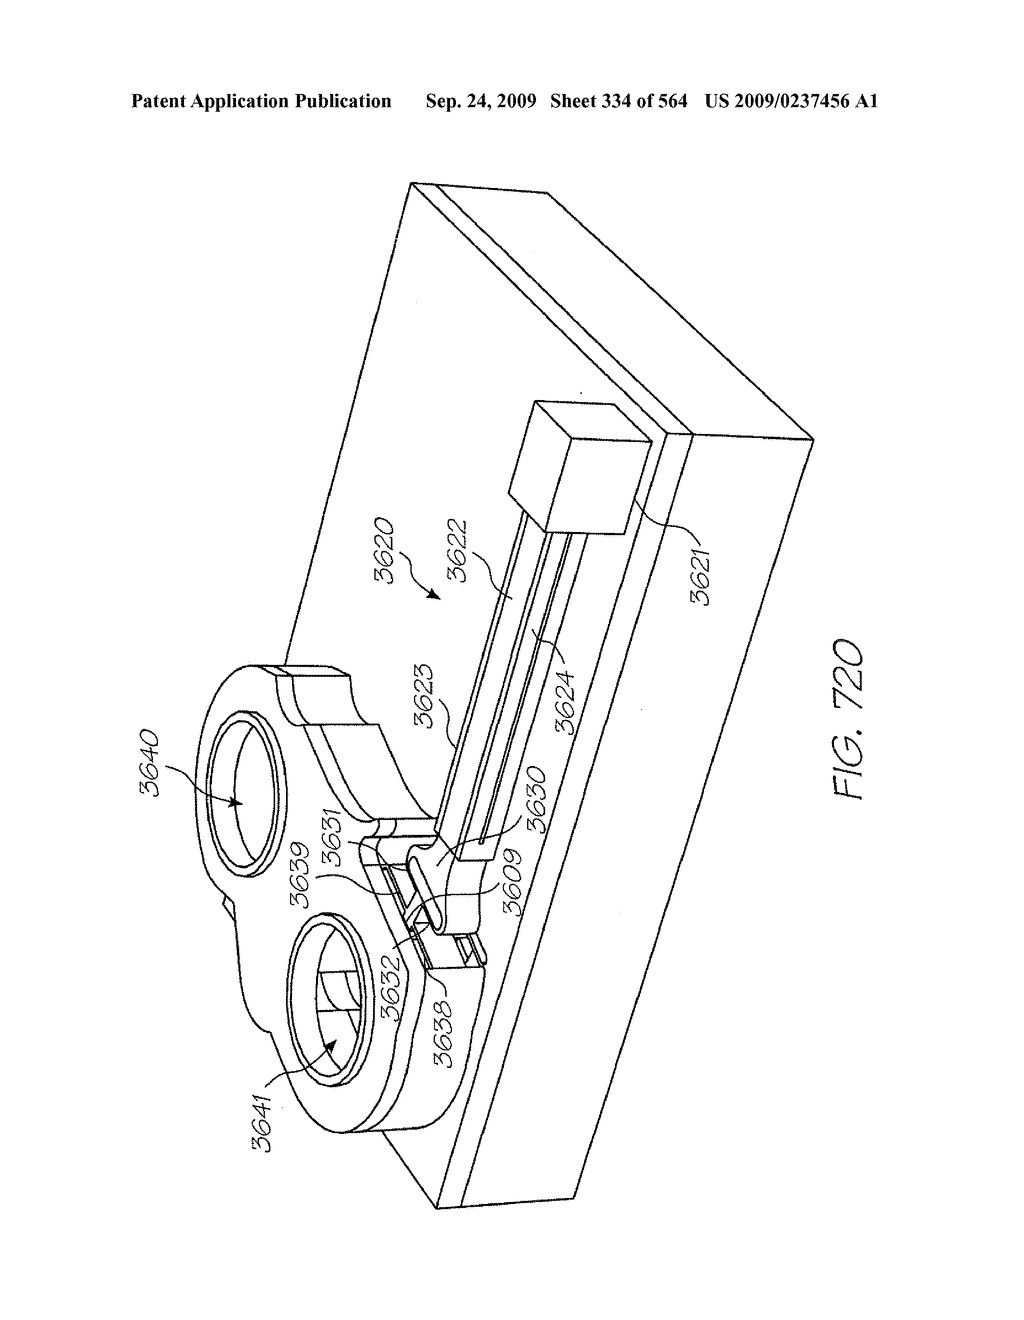 Inkjet Printhead With Paddle For Ejecting Ink From One Of Two Nozzles - diagram, schematic, and image 335